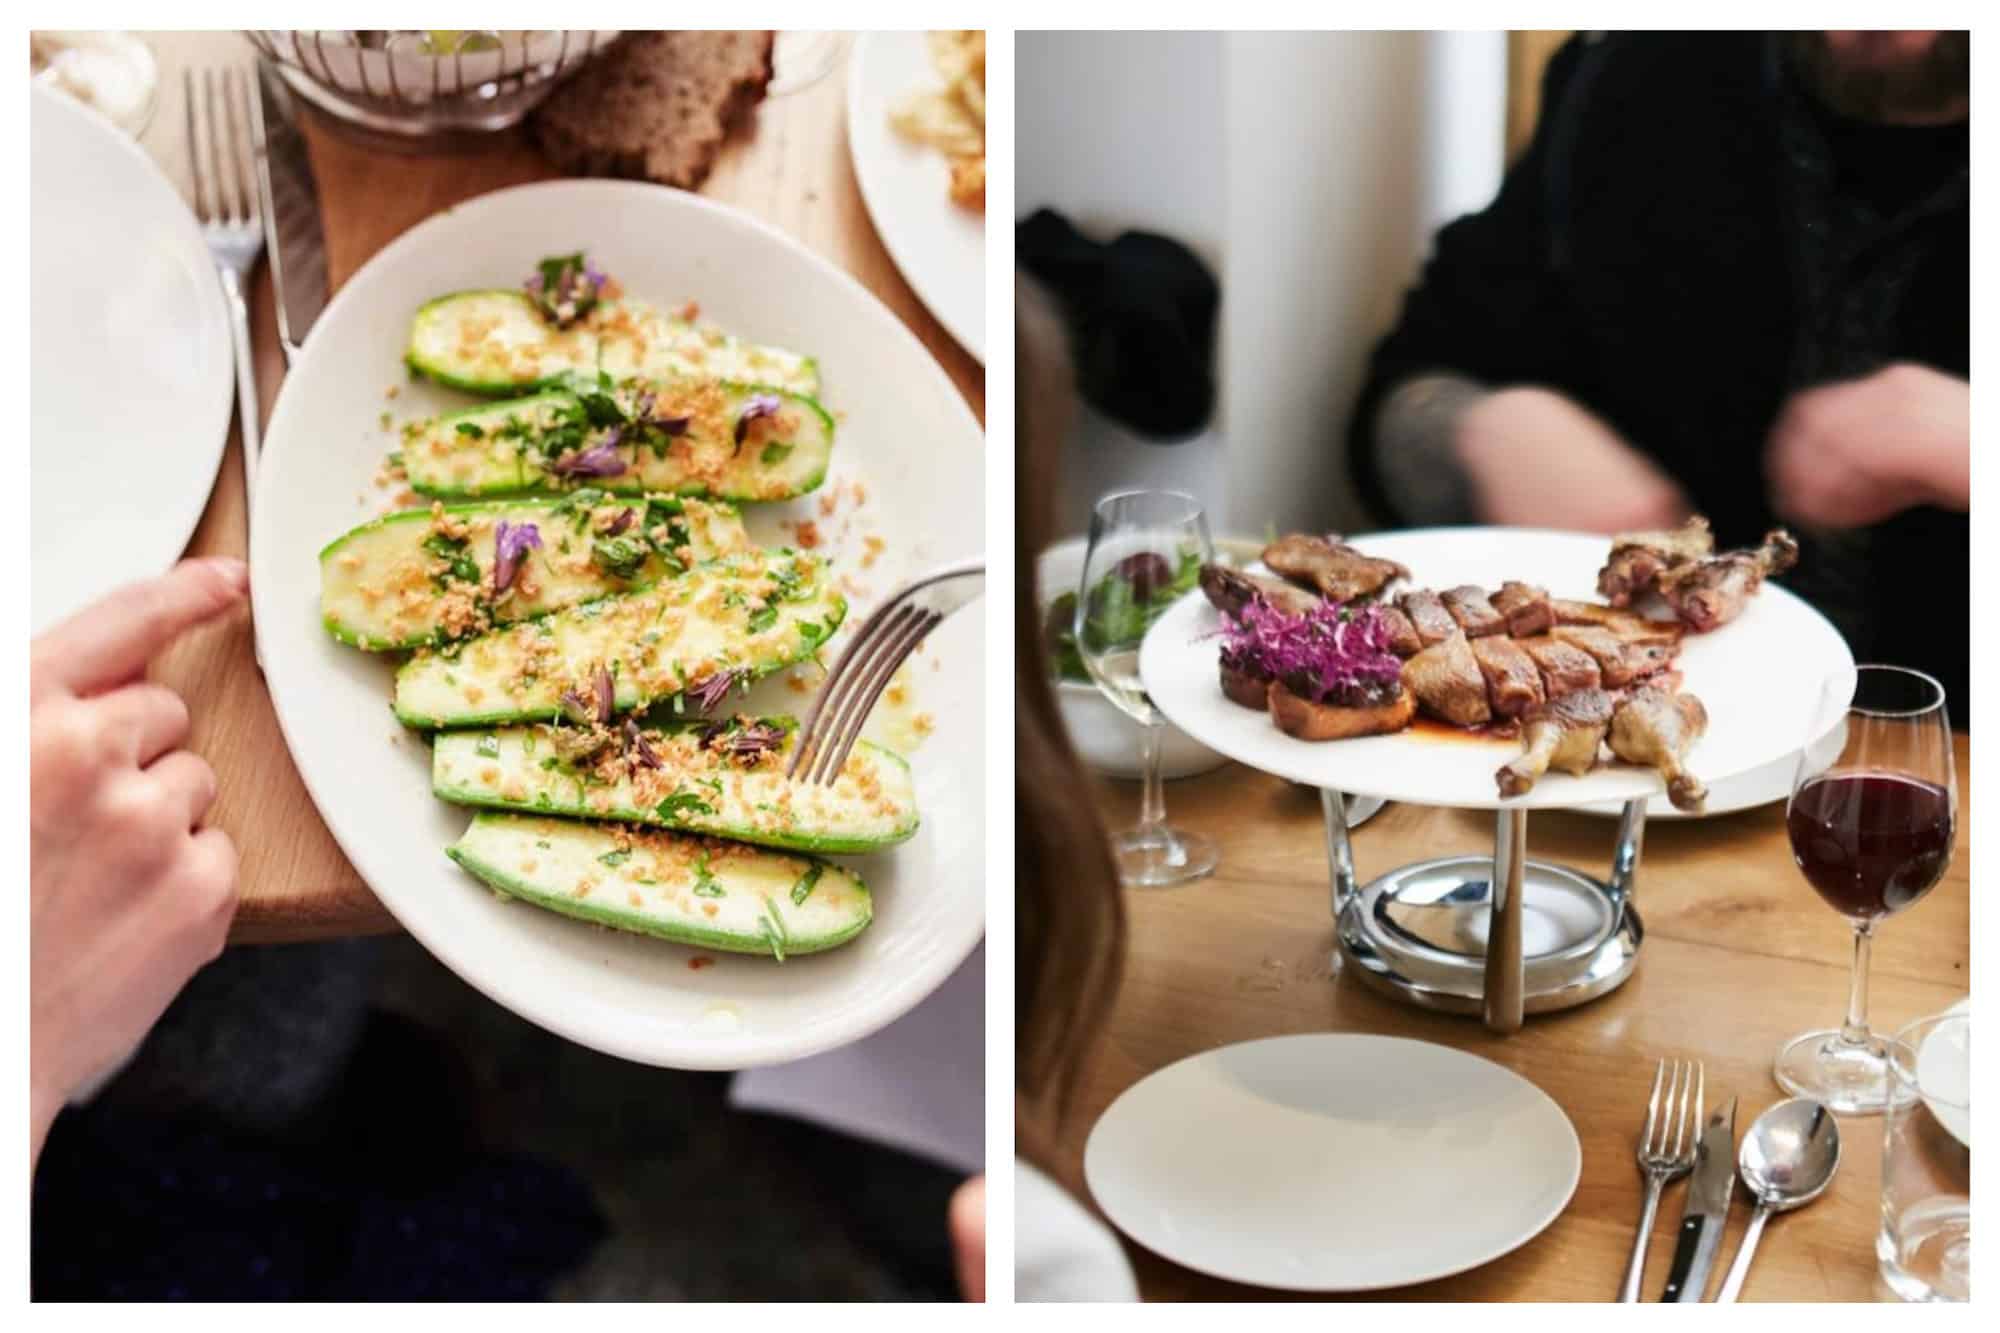 A go-to restaurant for great Italian food in Paris is Passerini for its crunchy courgettes (left) and meat dishes (right) as well as the hand-rolled pasta.